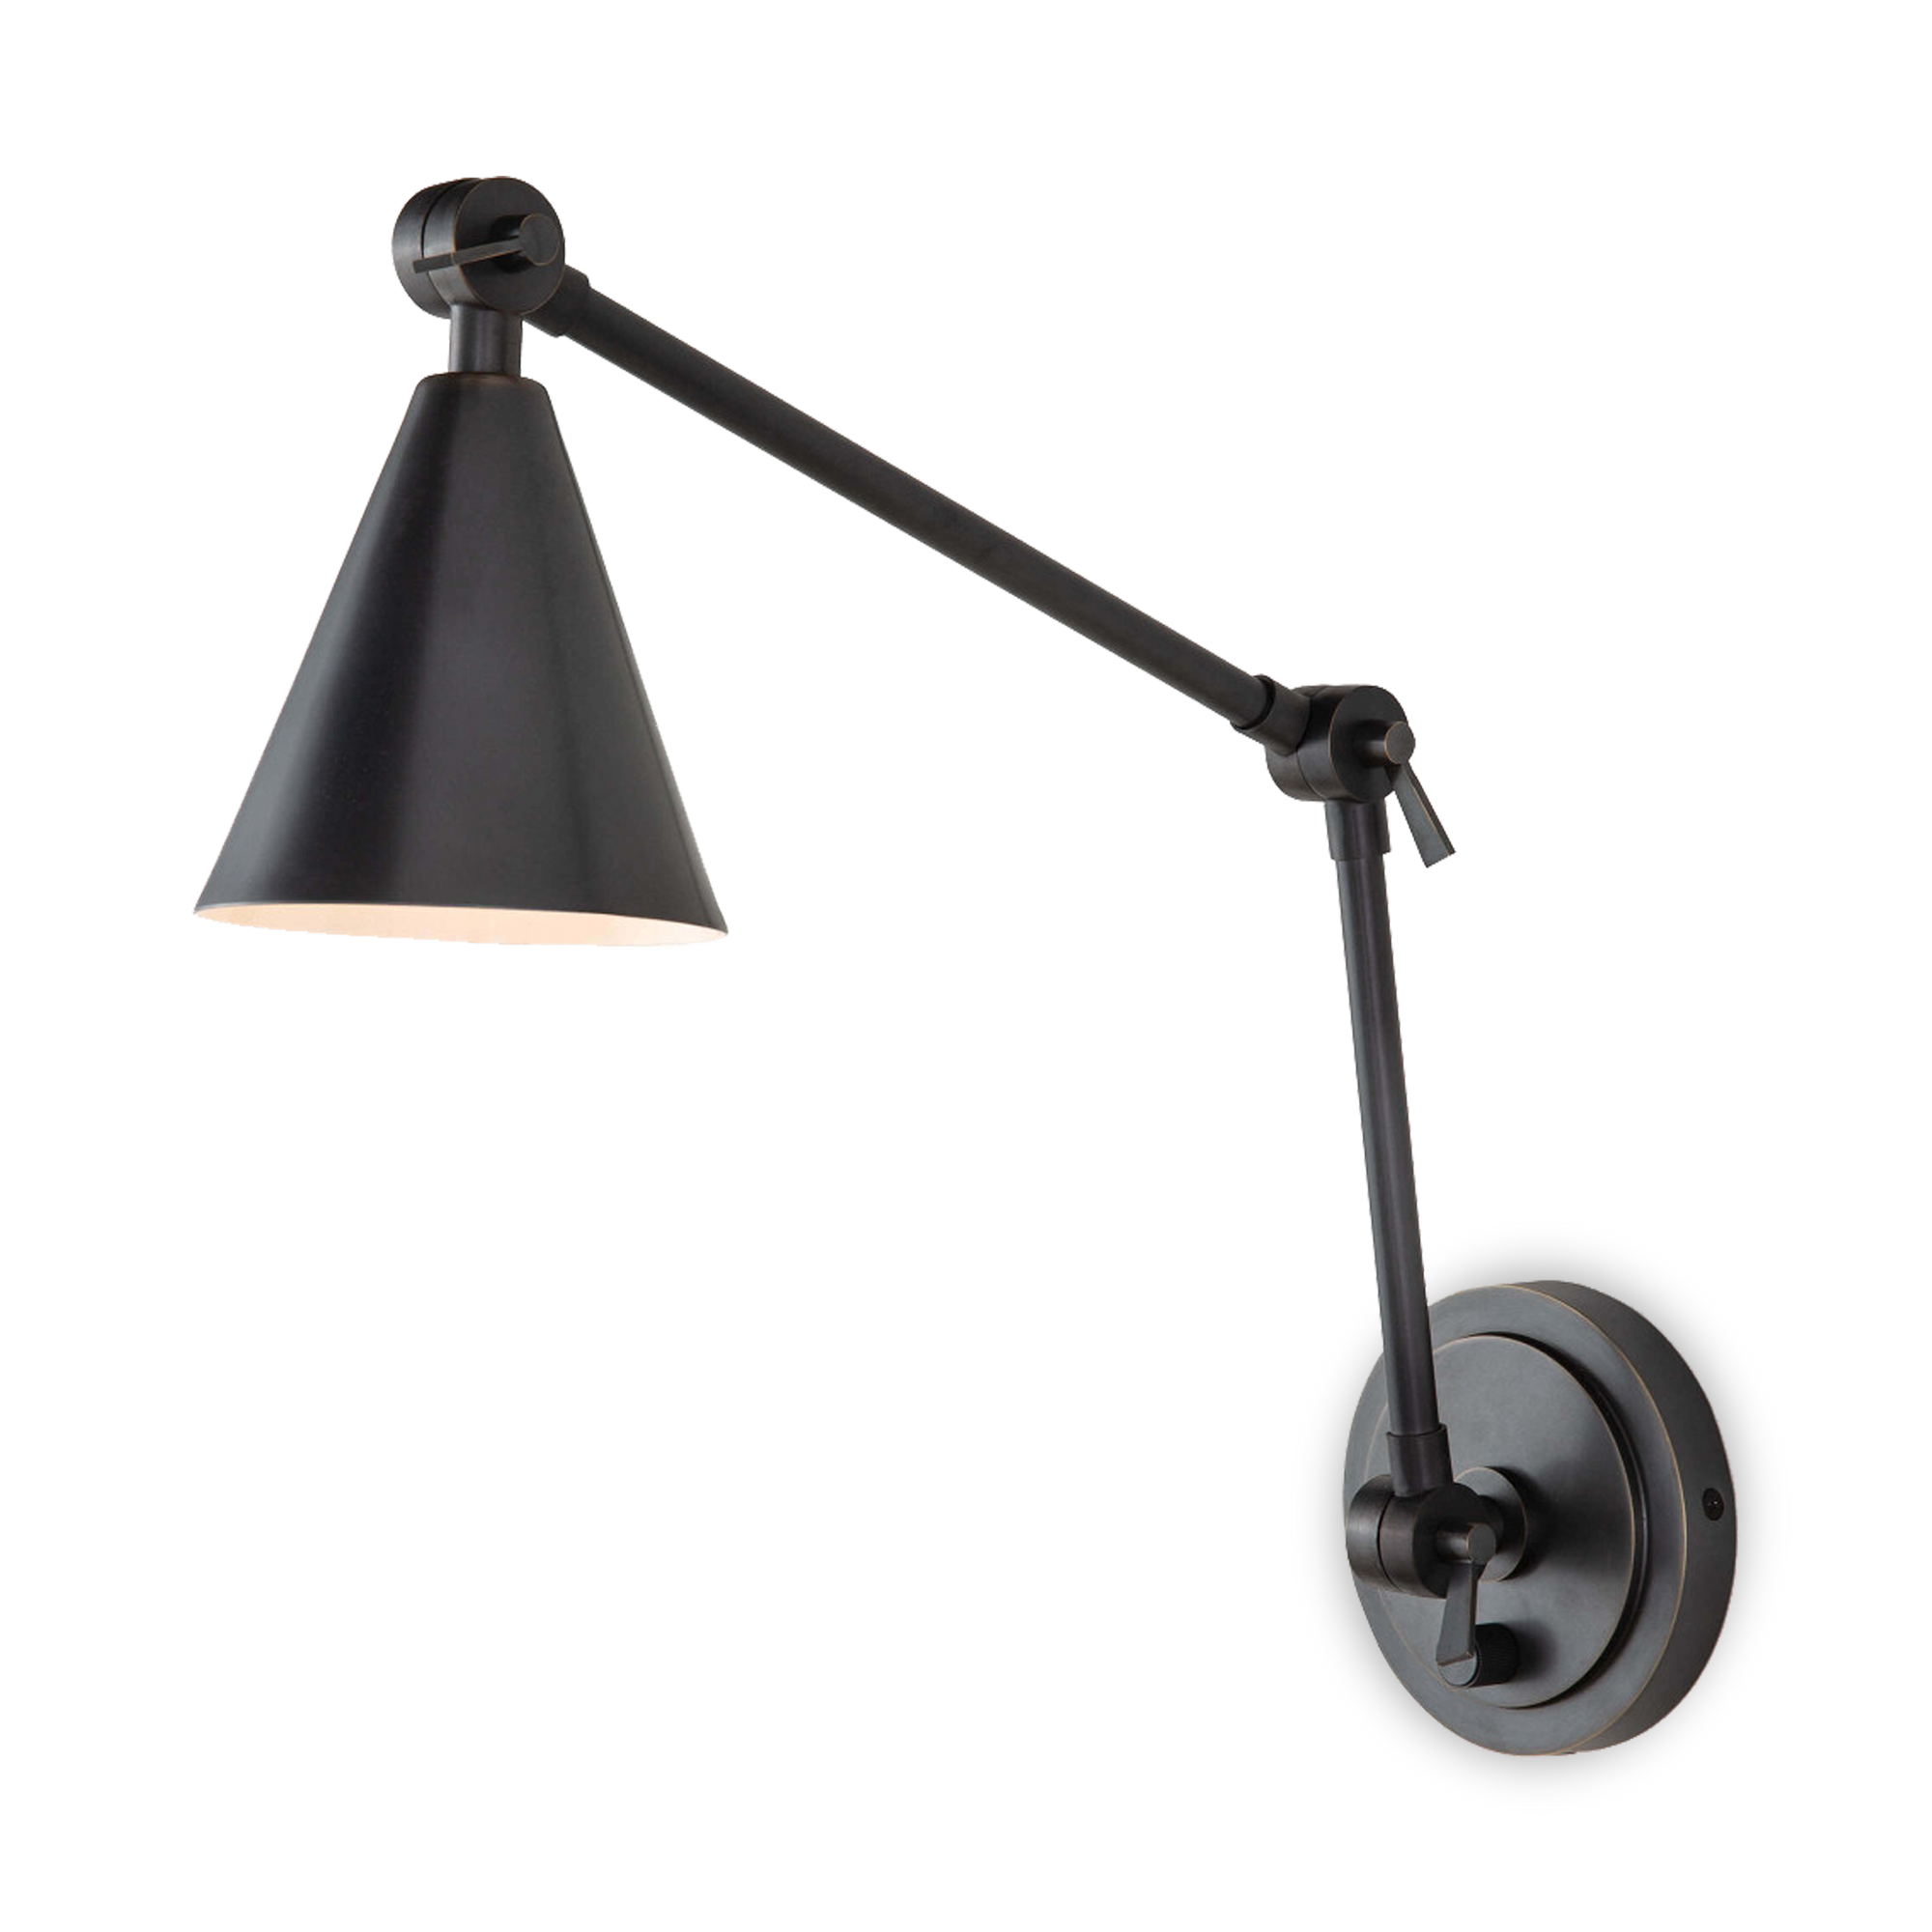 The dual adjustable arms make this a great sconce for bedrooms, kitchens, or a library.